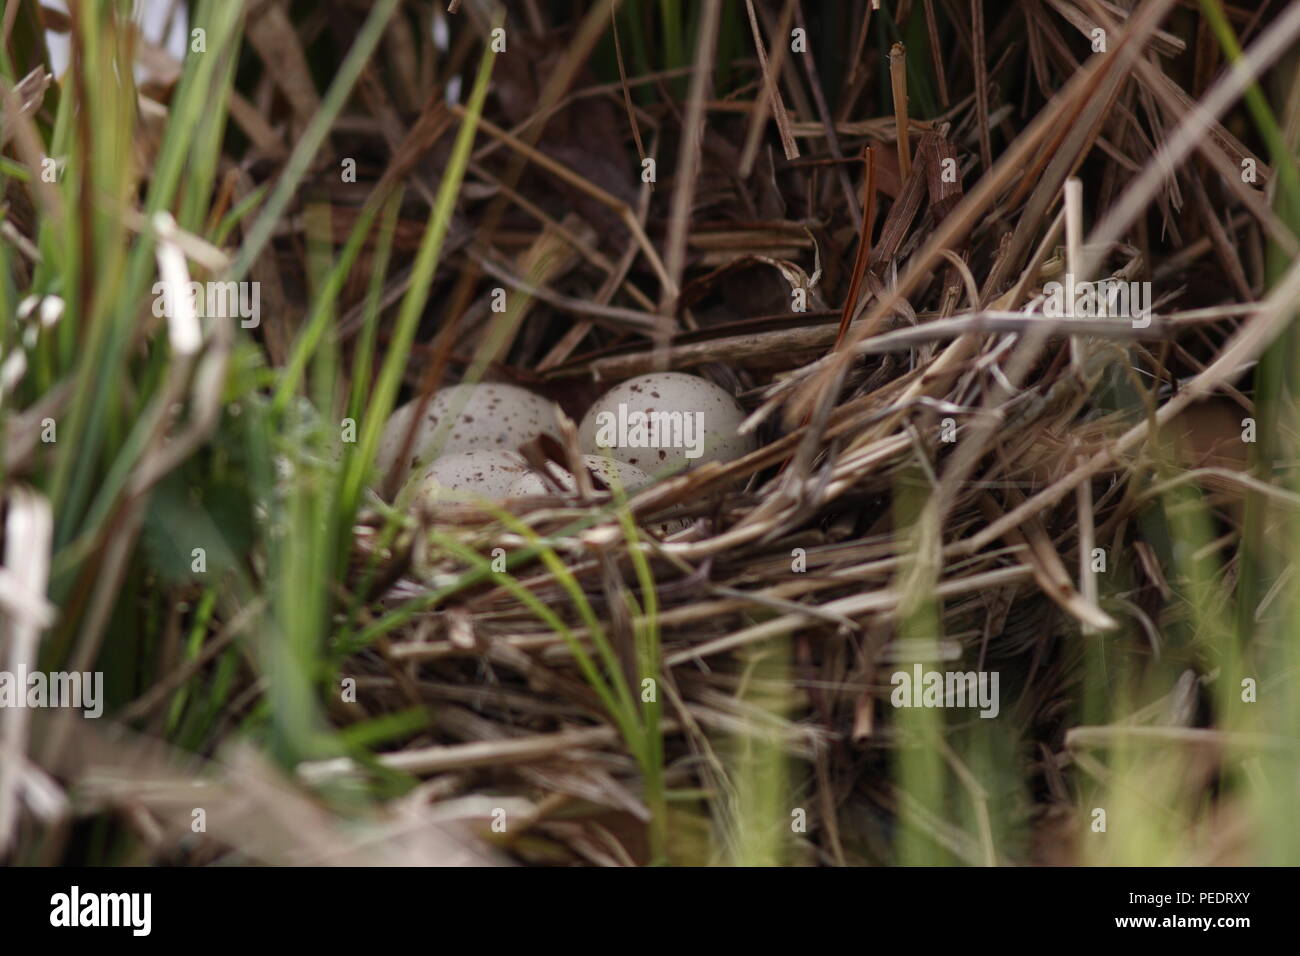 Moorhen Nest With Cream Specked Eggs In Reeds Within A Garden